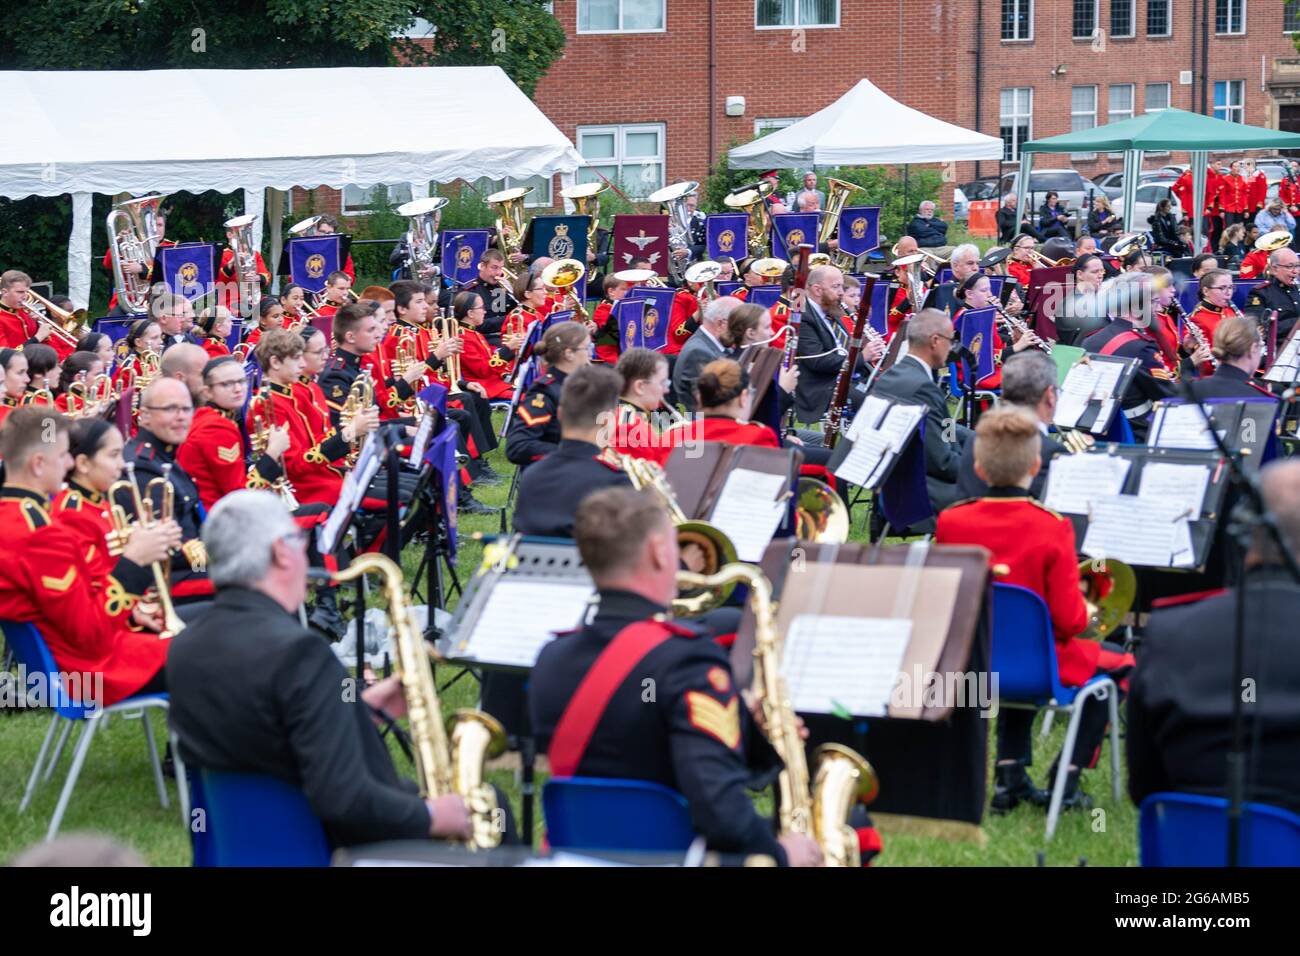 Brentwood Essex 4th July 2021 Brentwood Prom; a musical concert by the Brentwood Imperial Youth Band, the Friends of Kneller Hall band and the British Army Band, Colchester who played an outdoor concert at Brentwood County High School, Brentwood Essex. Credit: Ian Davidson/Alamy Live News Stock Photo